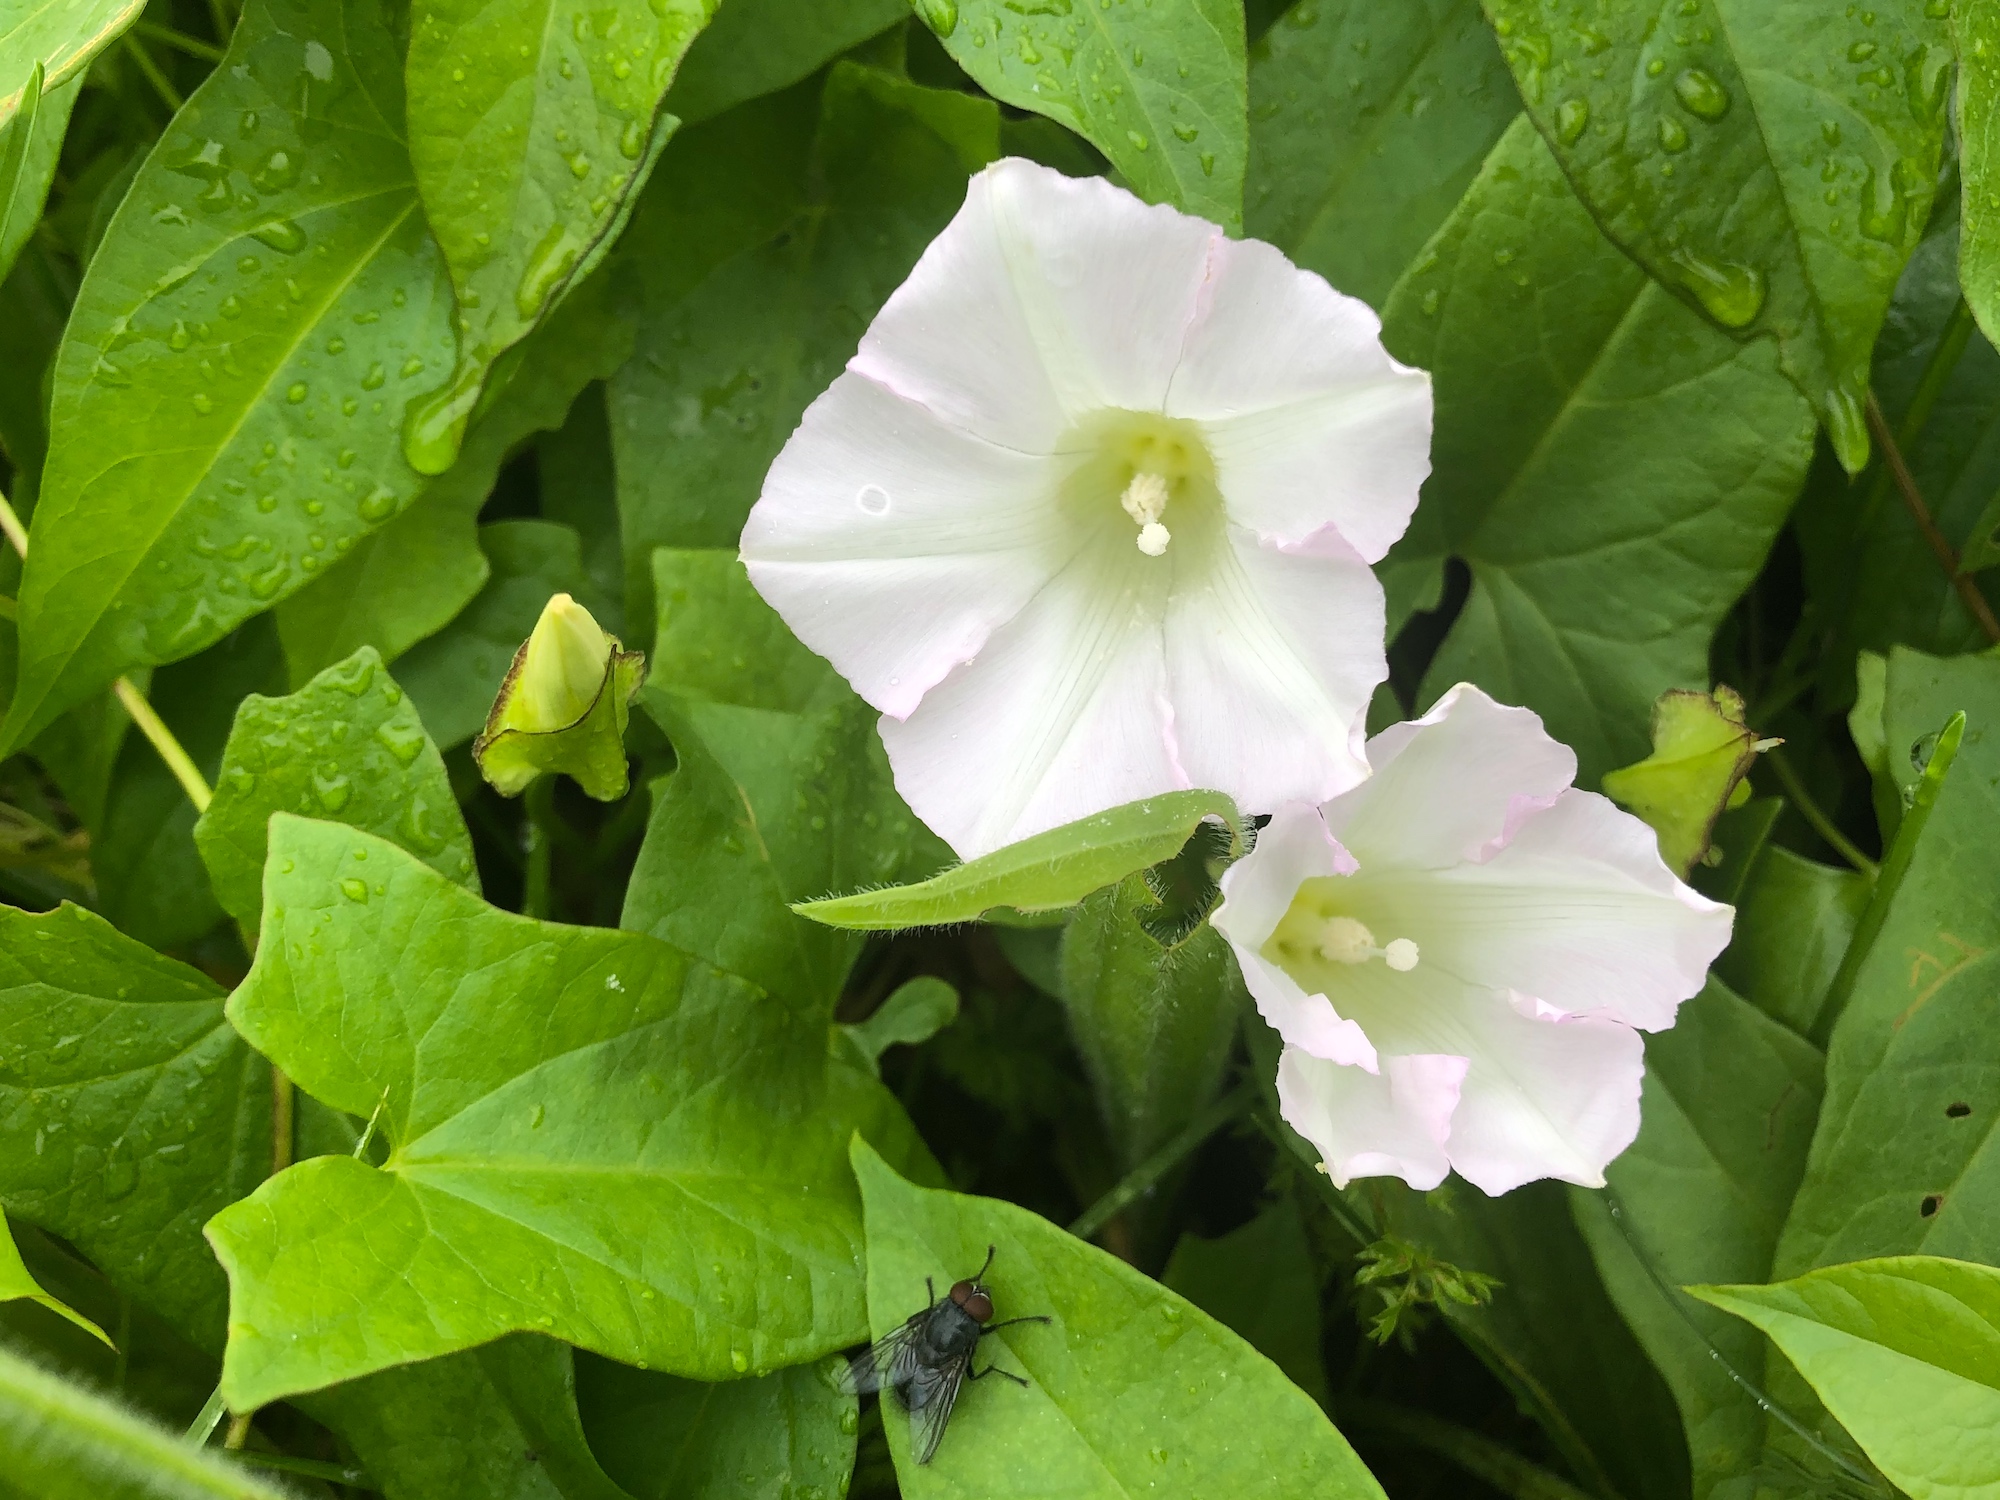 Hedge Bindweed on shore of Marion Dunn Pond in Madison, Wisconsin on September 28, 2019.